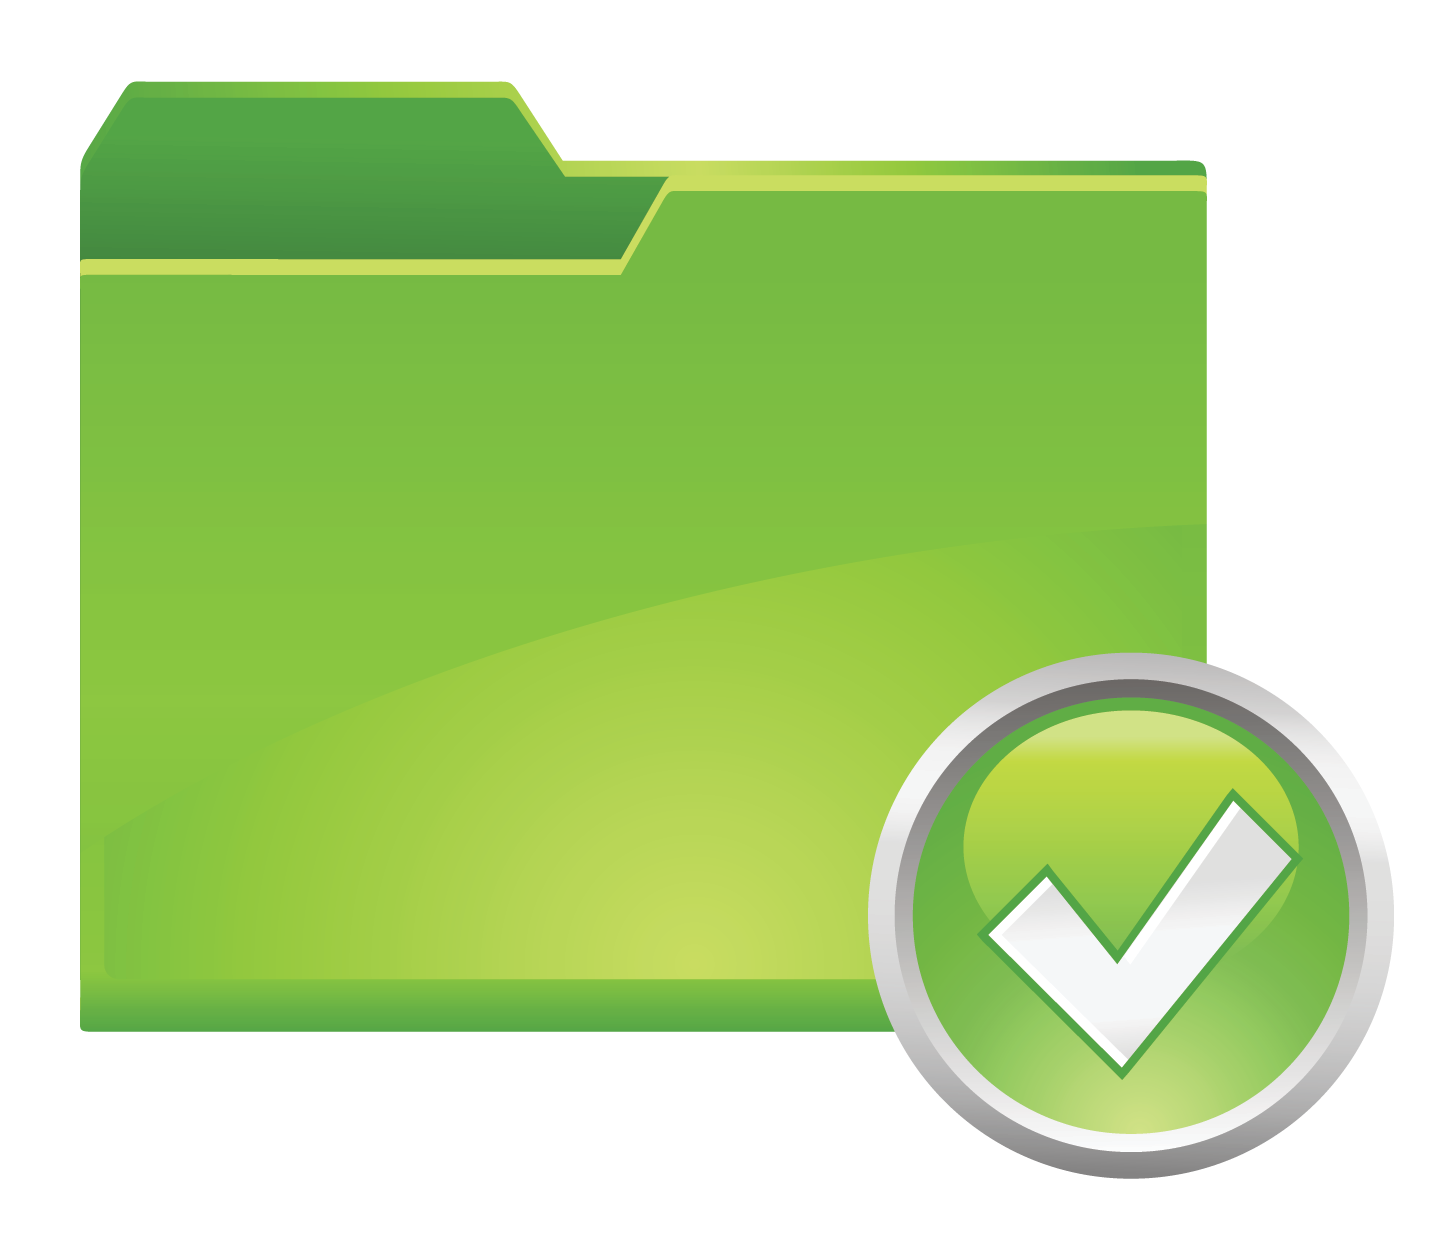 Green Folder with Check Mark